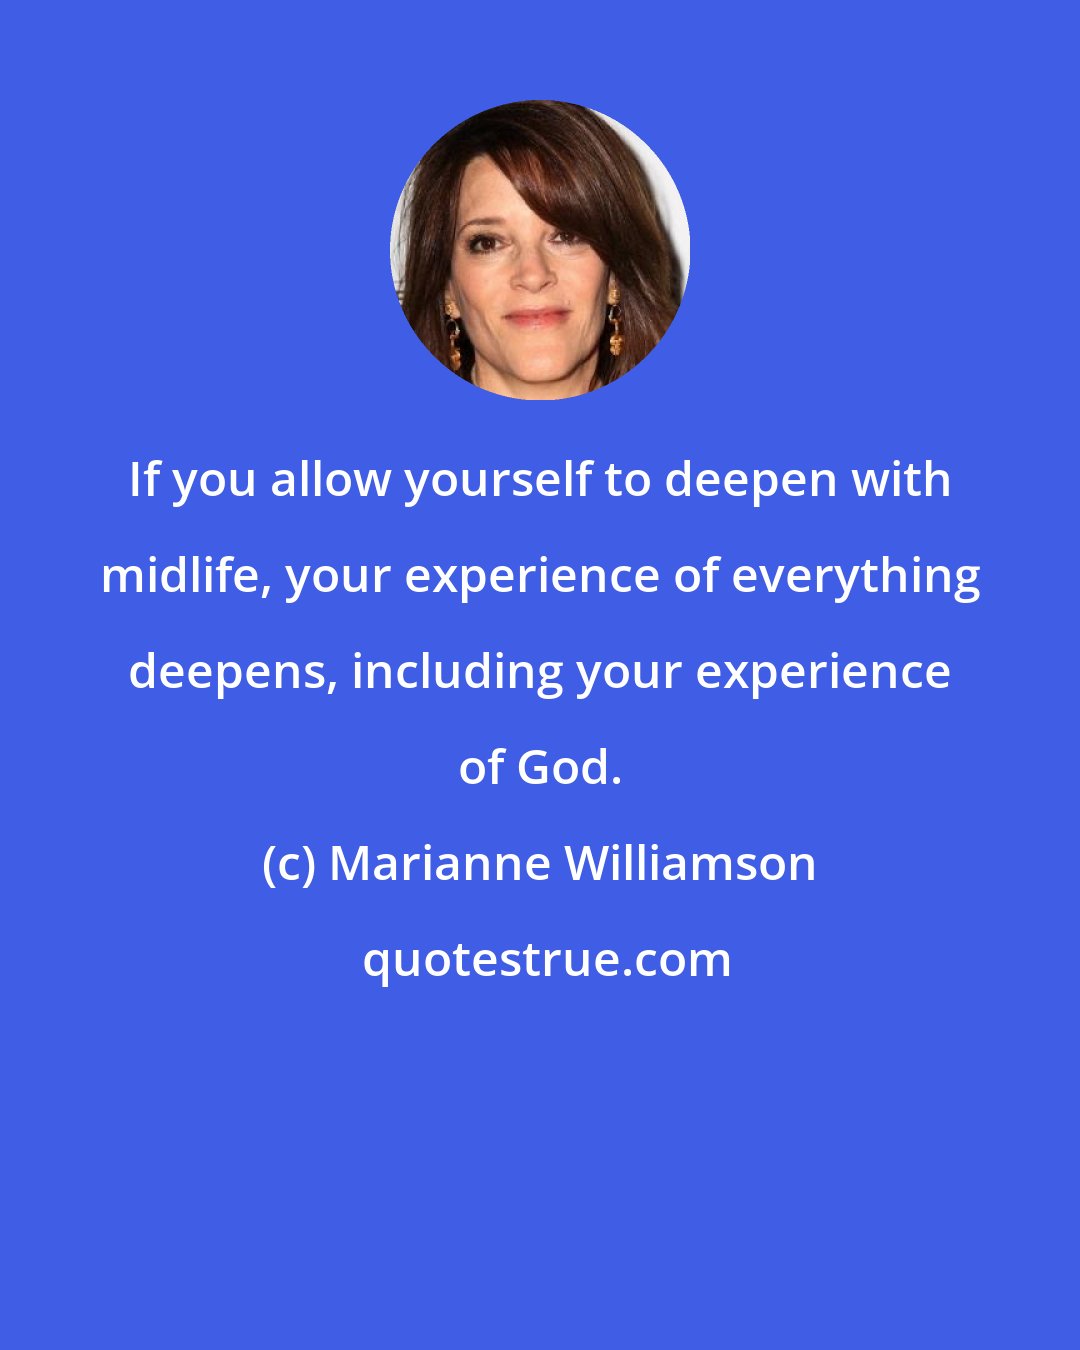 Marianne Williamson: If you allow yourself to deepen with midlife, your experience of everything deepens, including your experience of God.